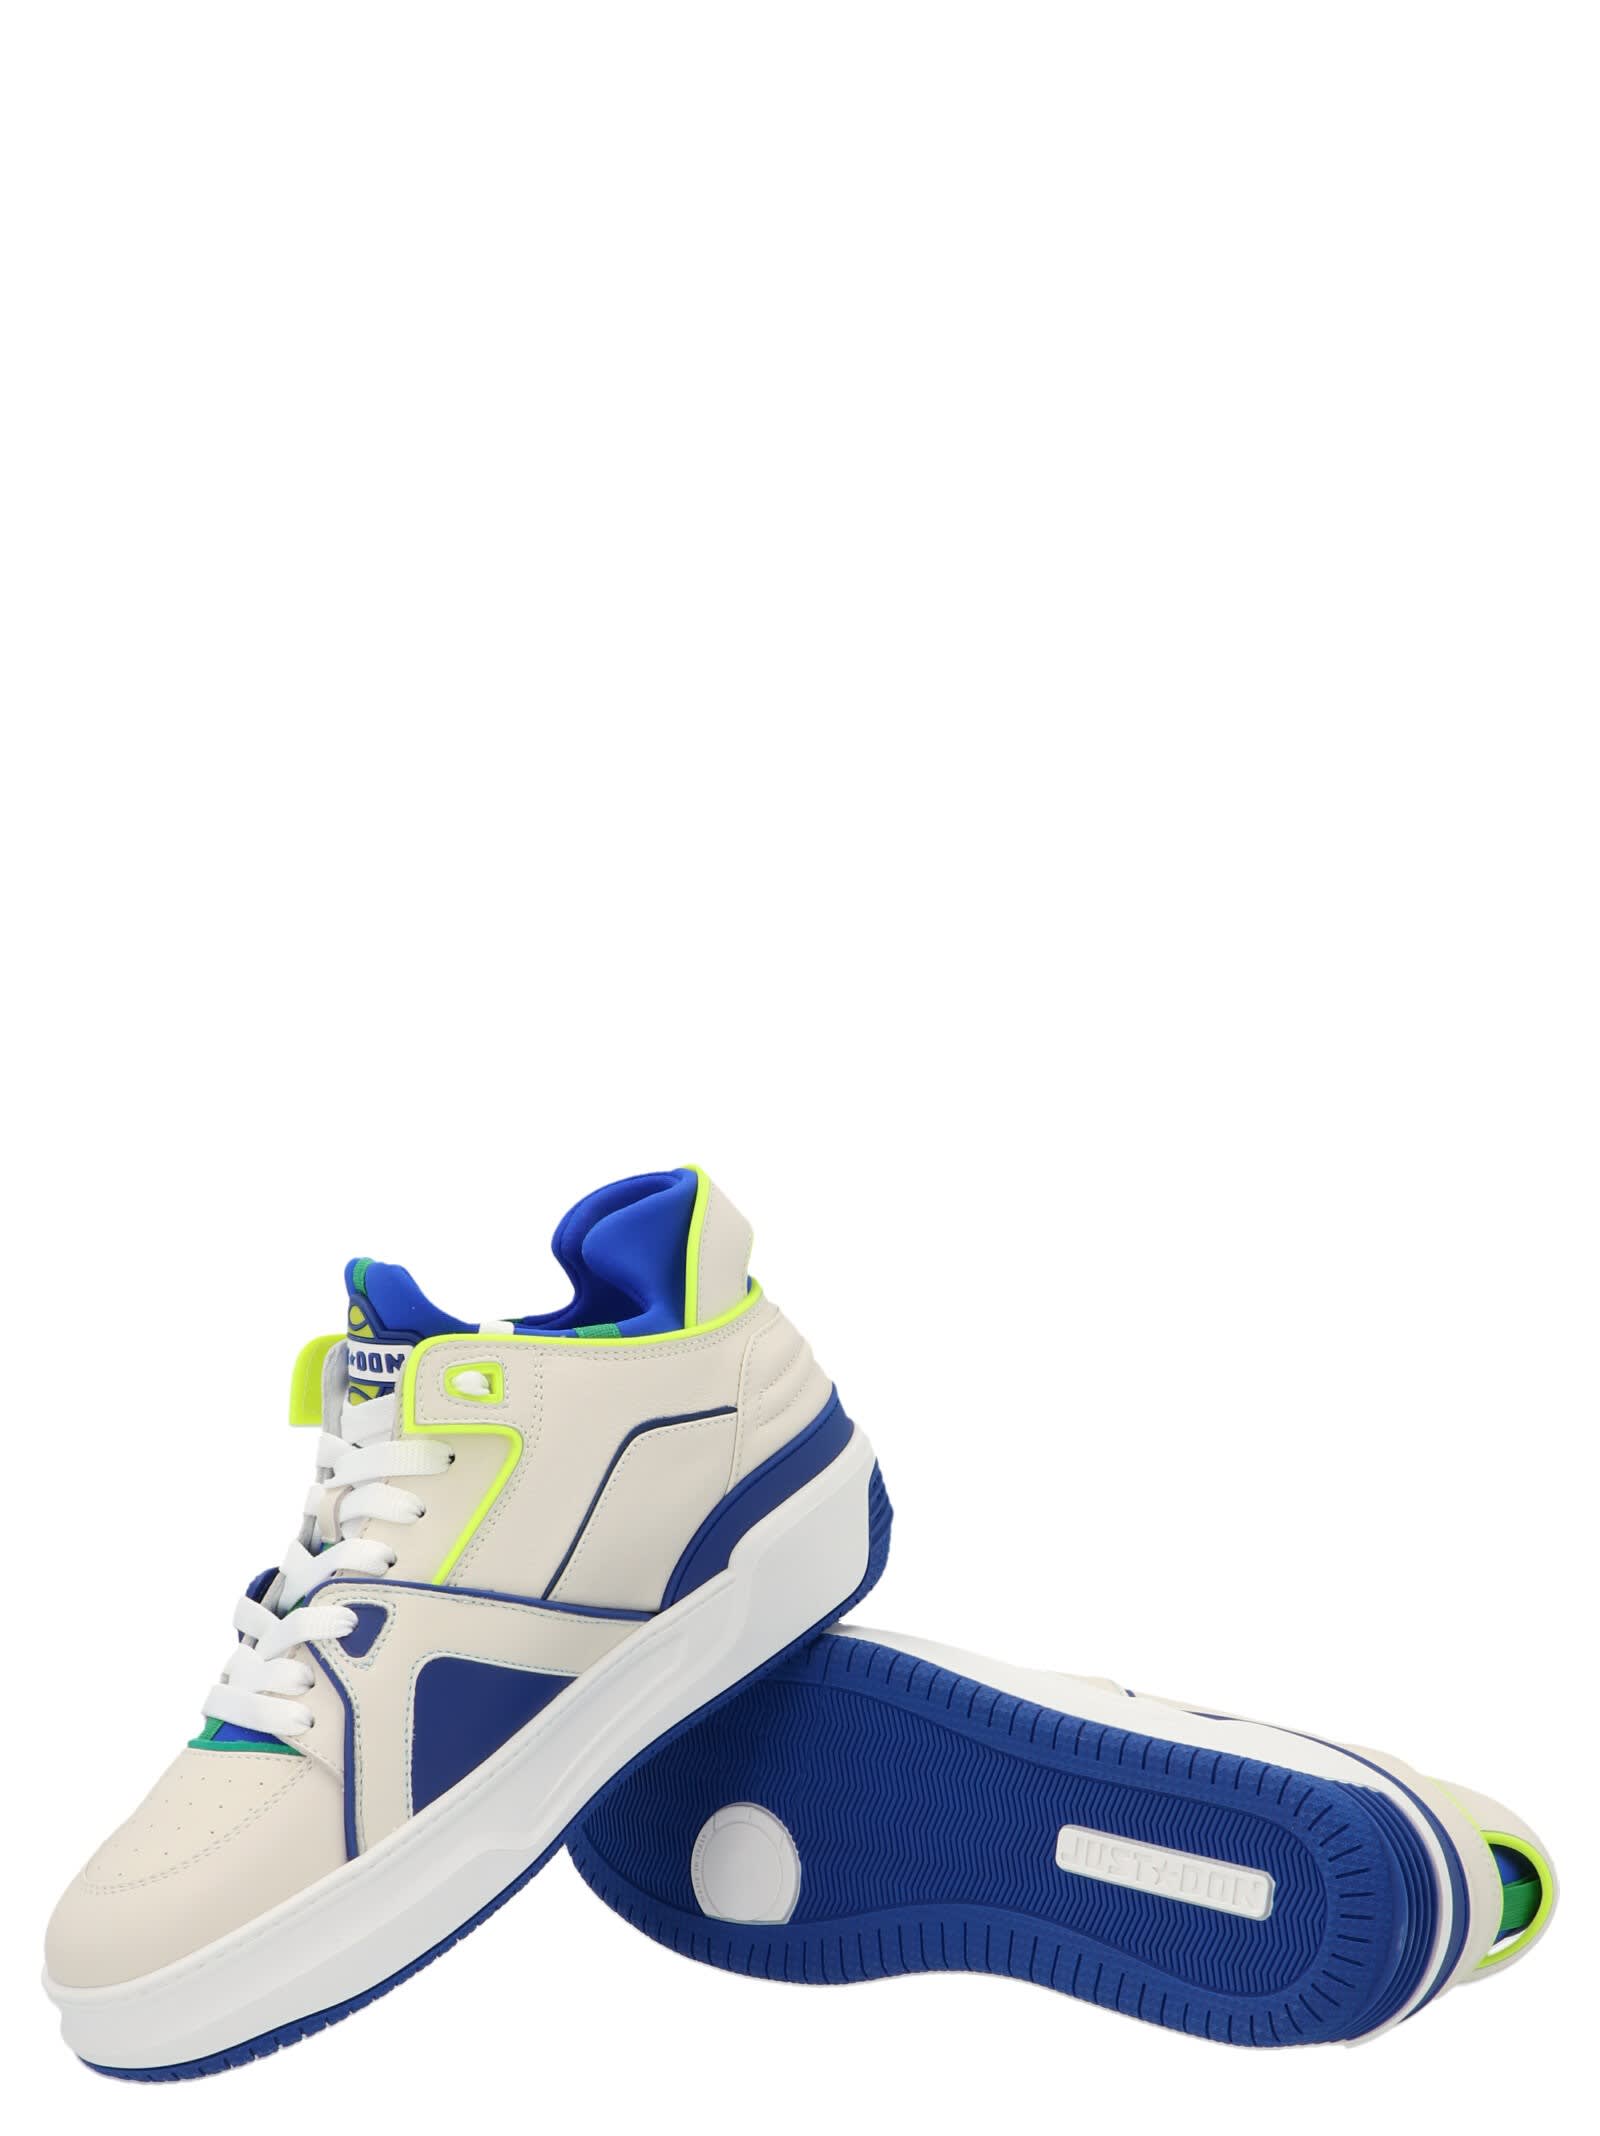 Just Don courtside Tennis Mid Jd2 Sneakers